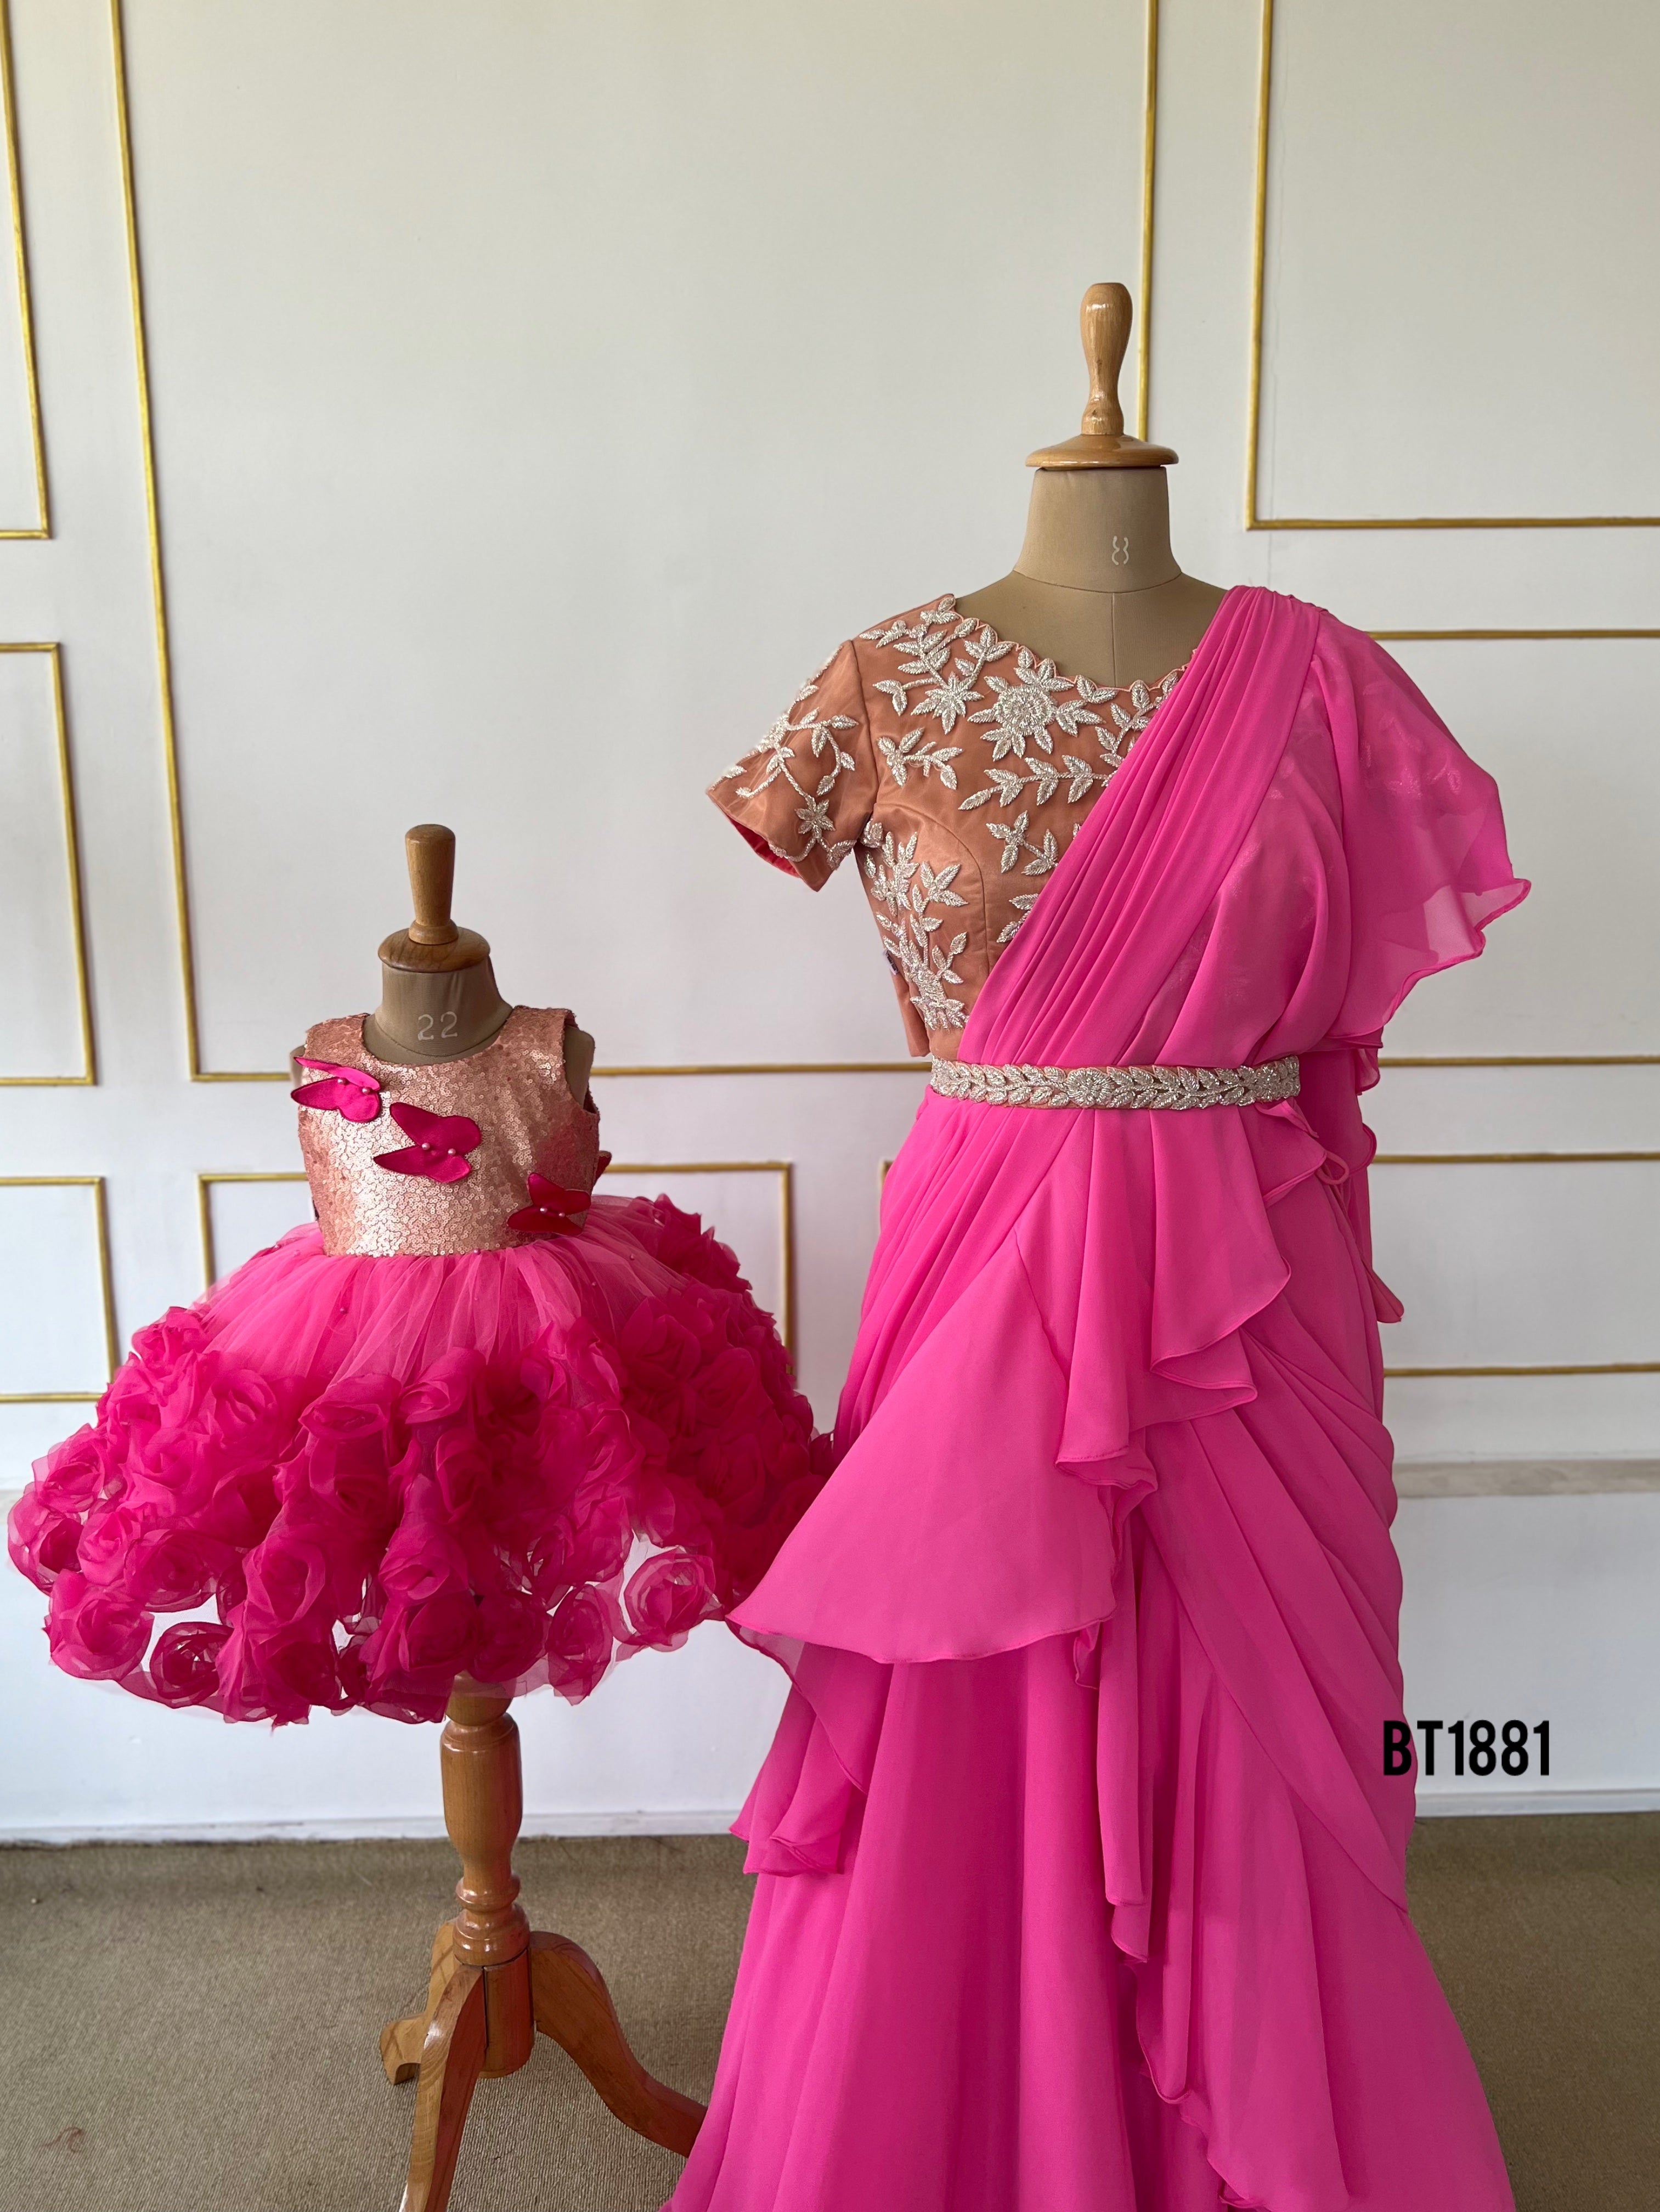 BT1881 Radiant Rose Twinning Attire for Mother & Babe